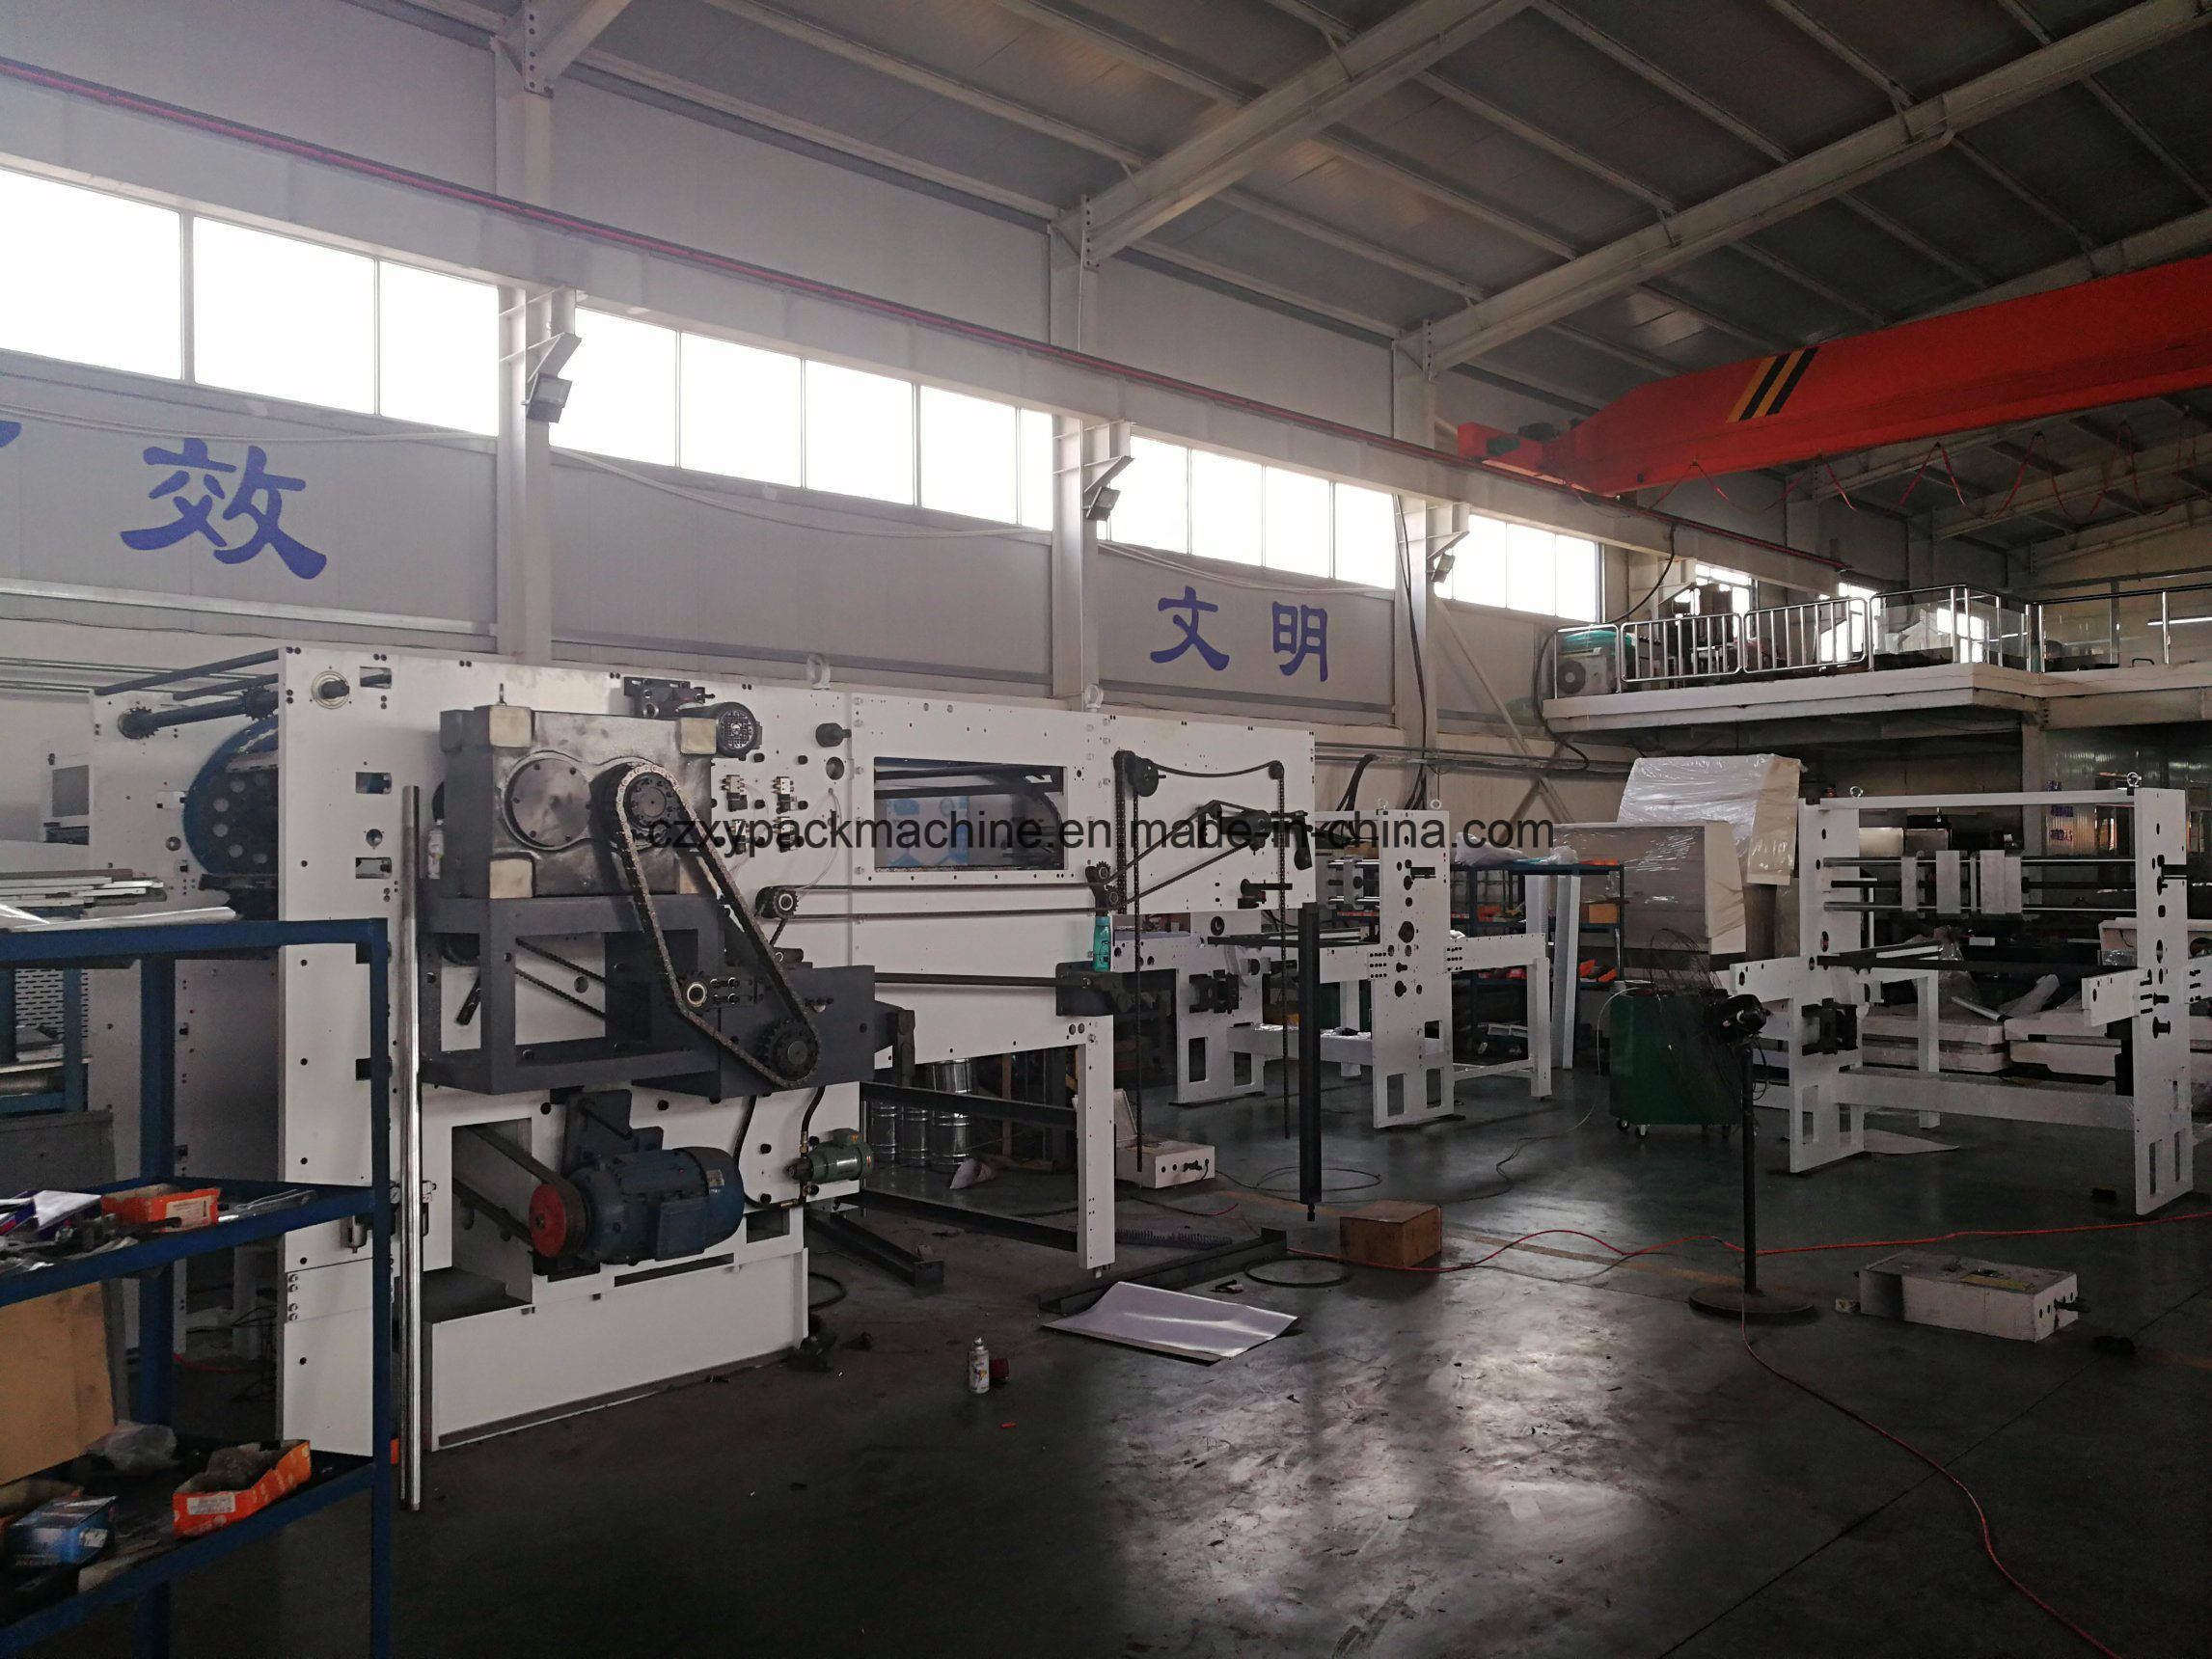 Hot Sale Full Automatic Flat Bed Die Cutter with Stripping Machine